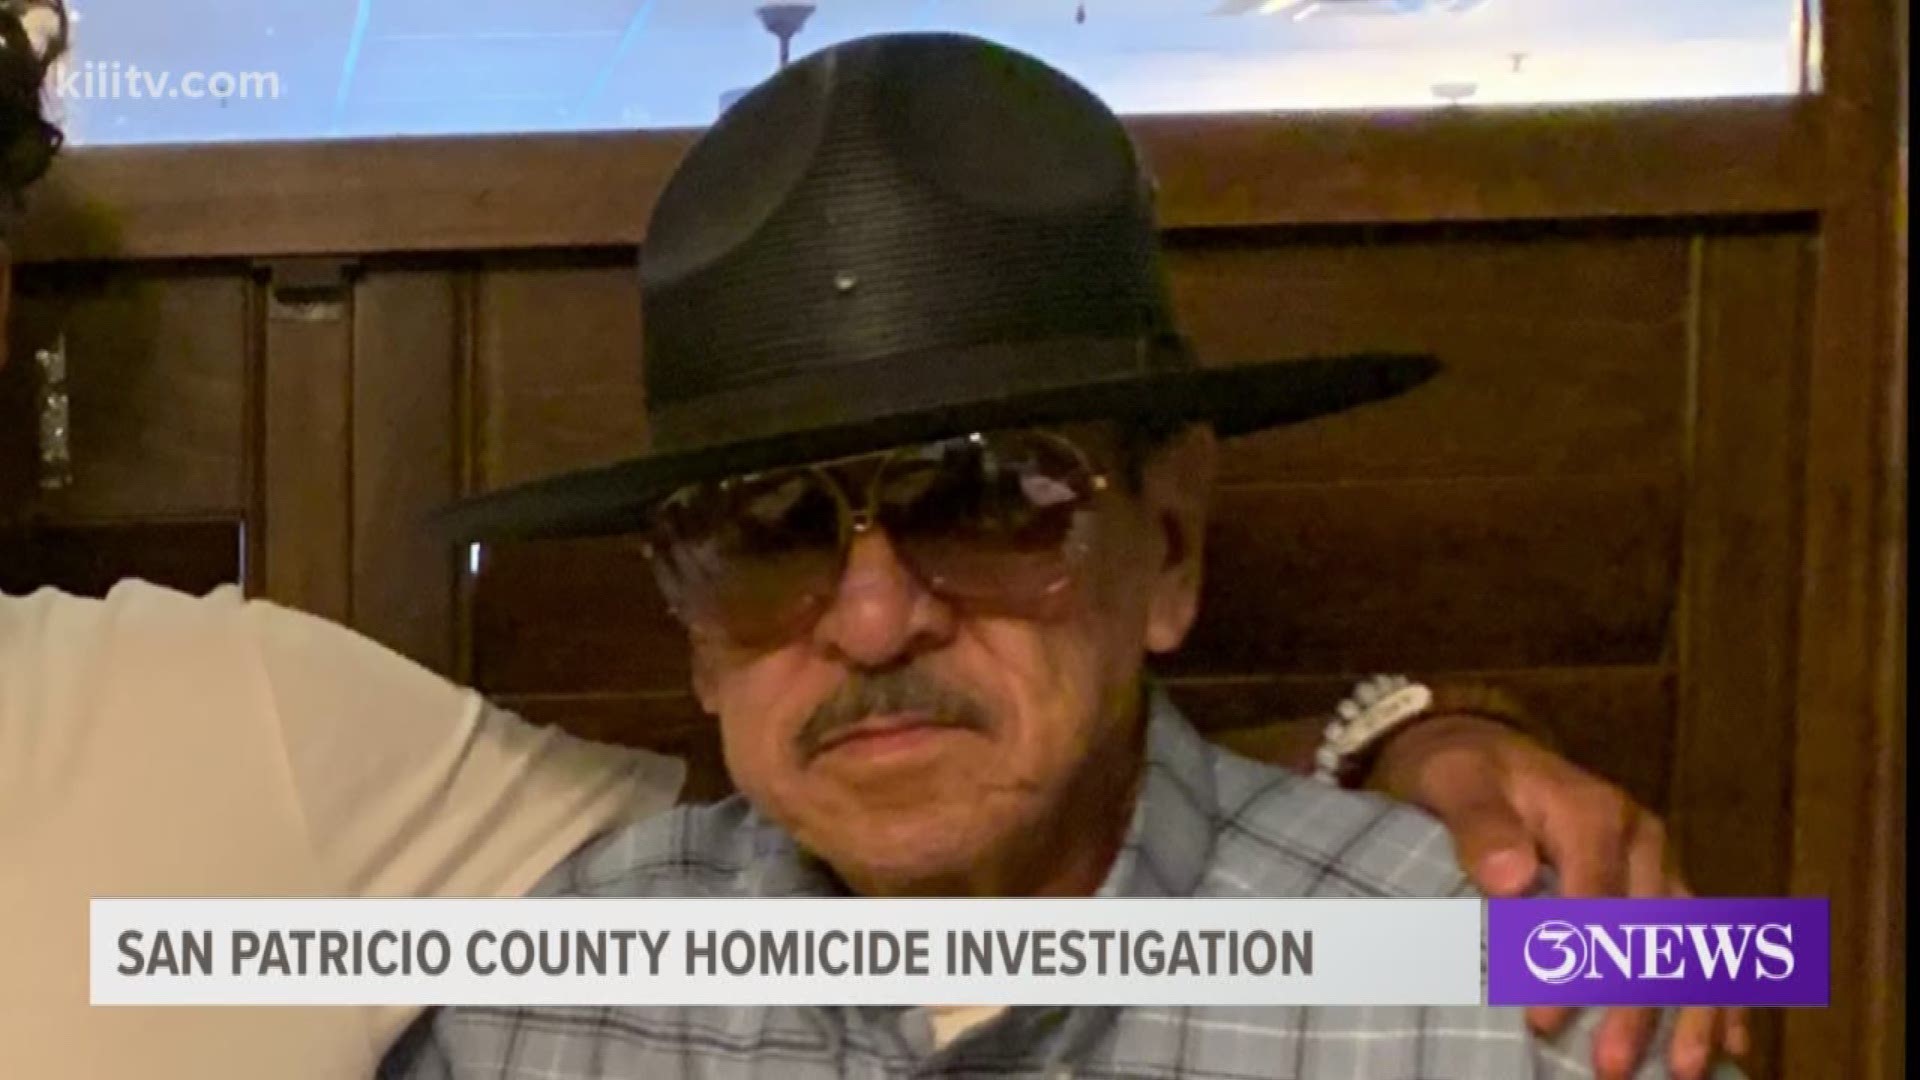 Authorities in San Patricio County have two persons of interest in the killing of 71-year-old Manuel Pardo.